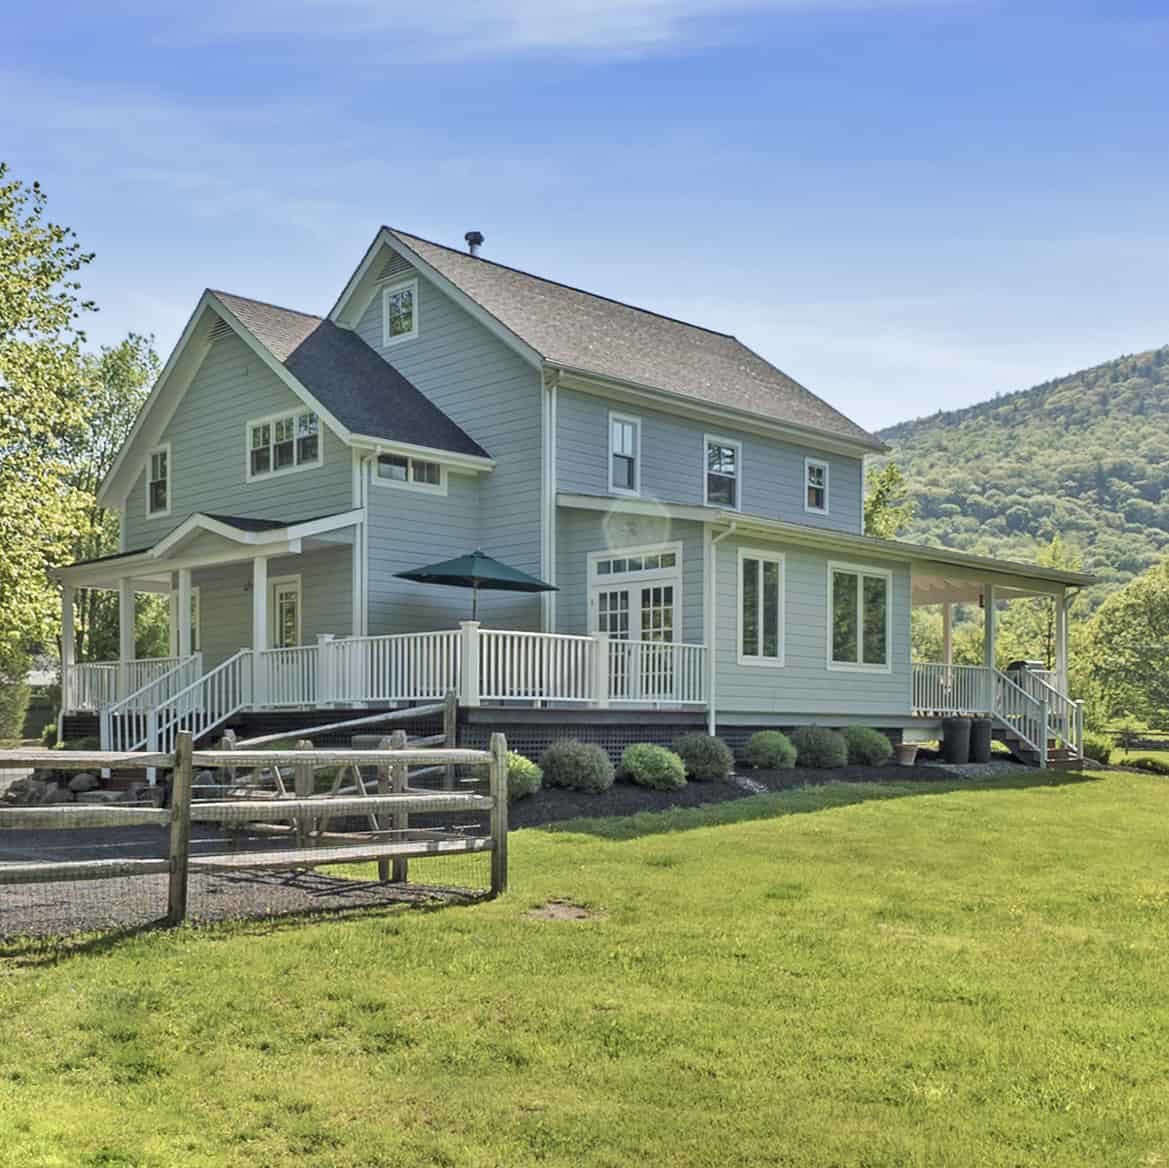 What company sells the most real estate in the Catskills